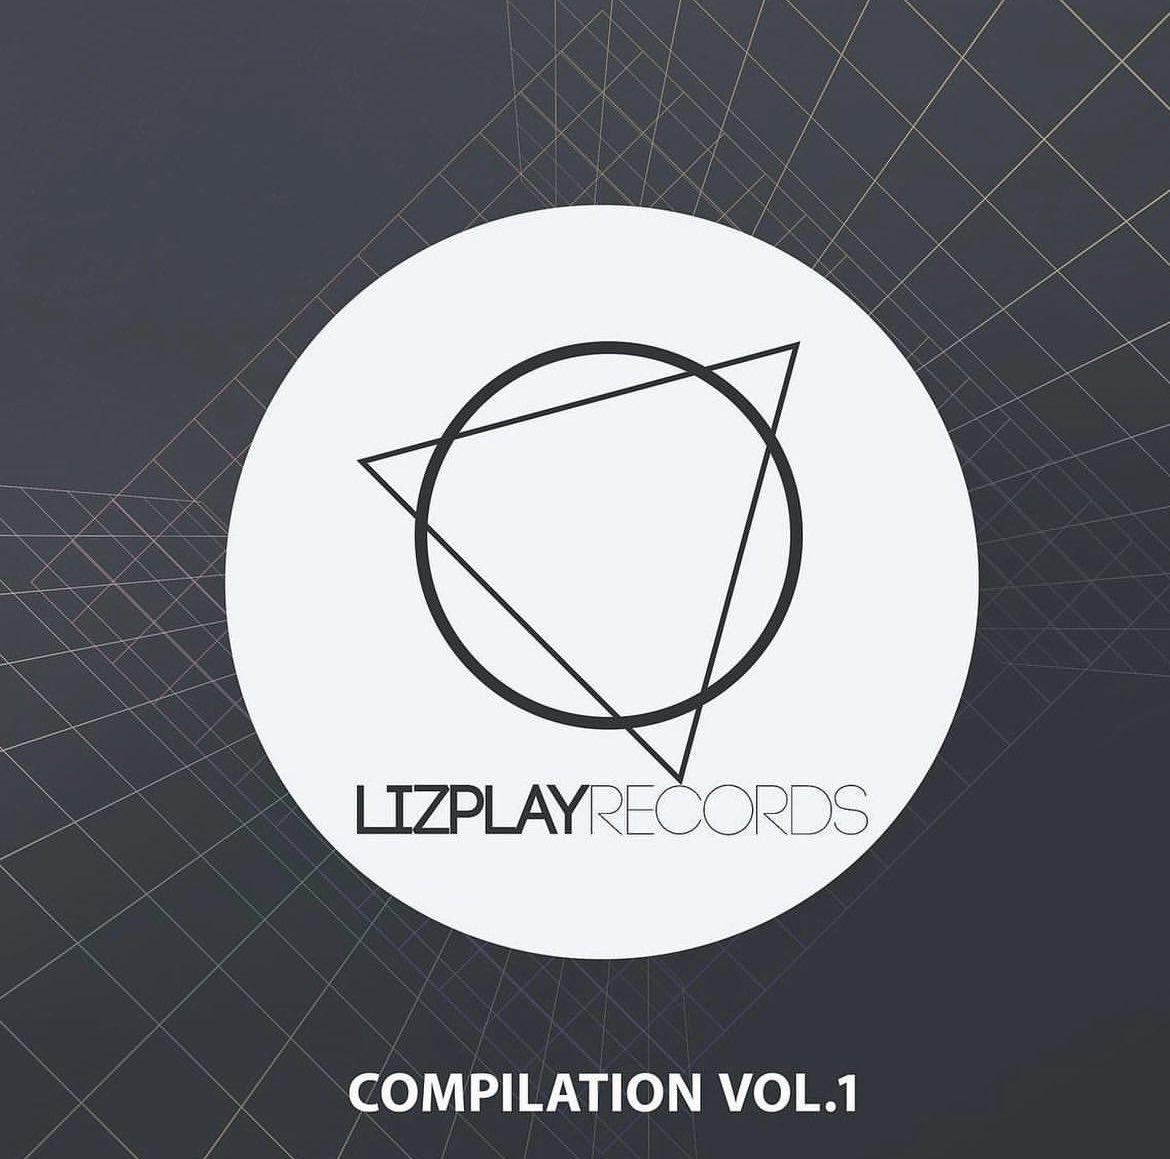 Yassss ‘Lost It All’ appears on the #lizplay records Volume 1 compliation, check it out! My next release is out in November - a euphoric, orchestral dnb beauty 💥💥🎶🎶
#dnb #newmusicalert #laborday #topliner #britishartists #dnbartists #electronicmusicartists #singersongwriter